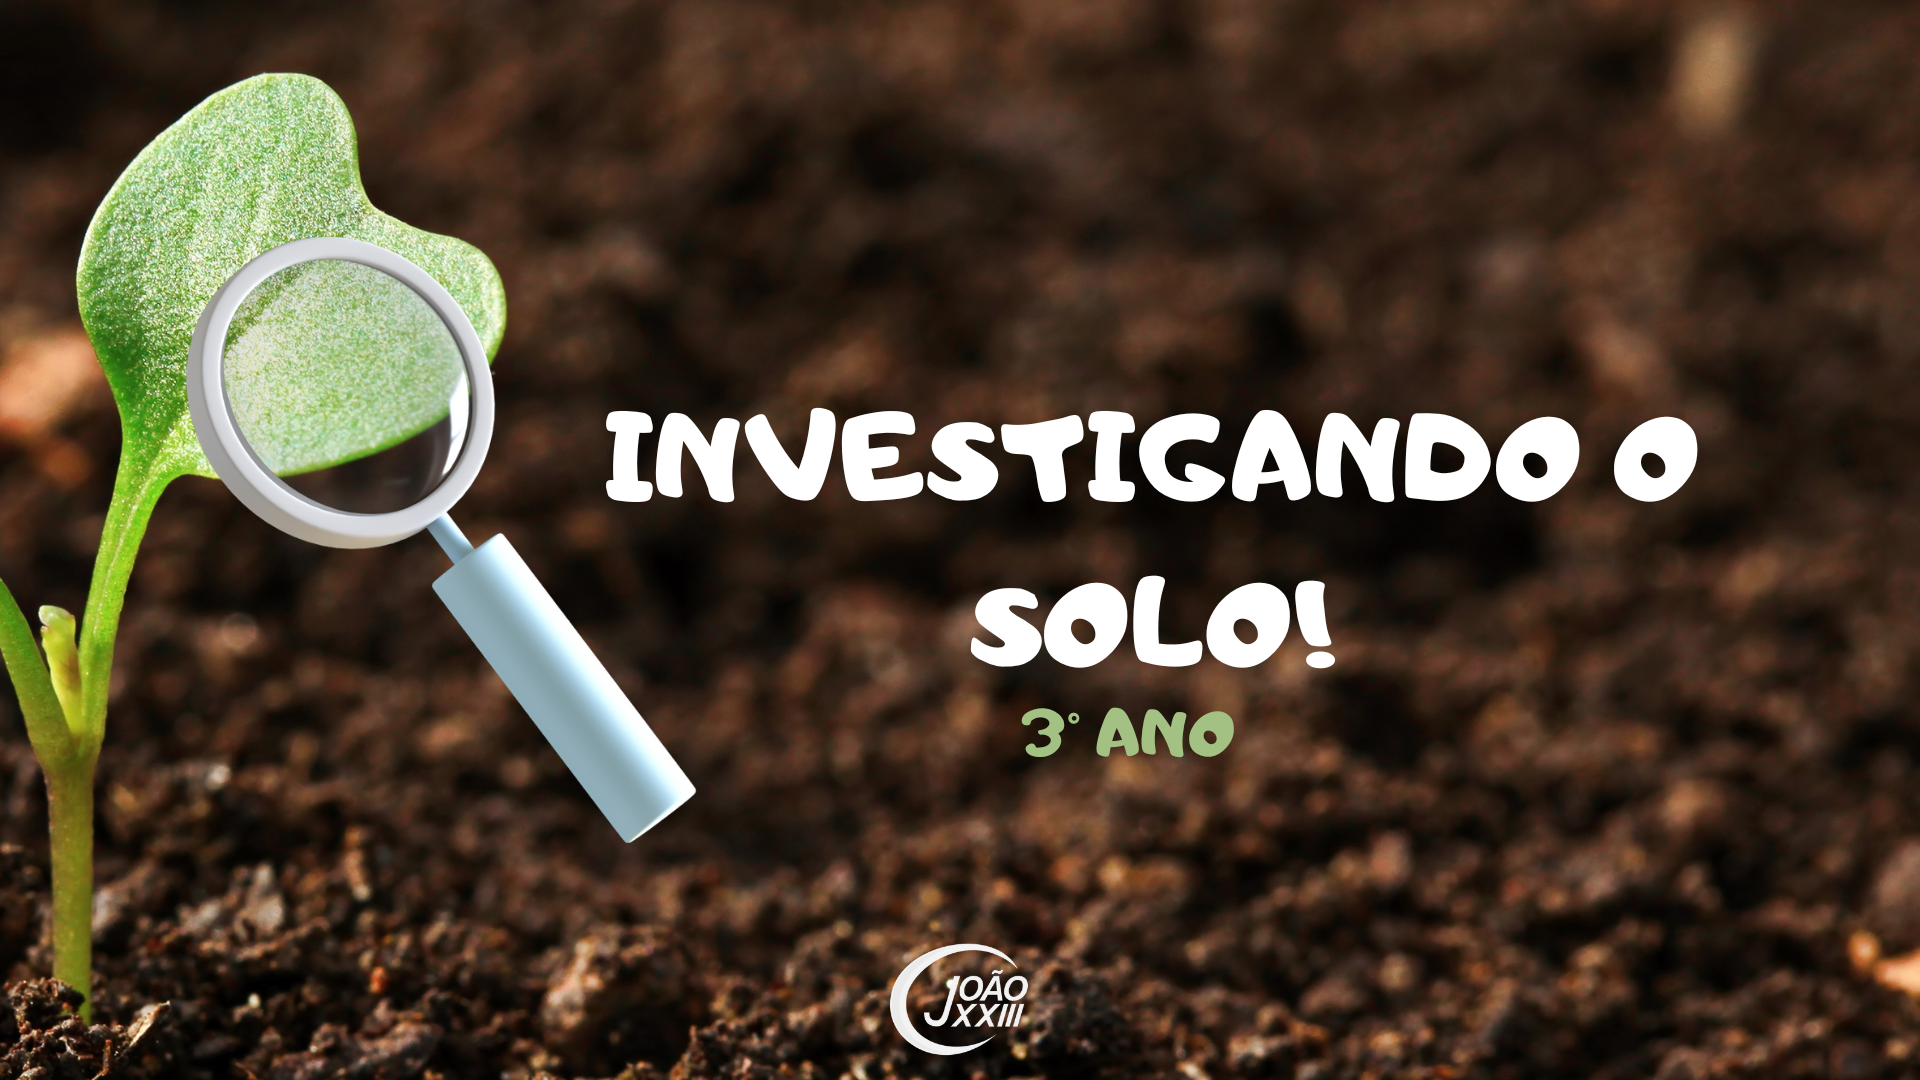 You are currently viewing Investigando o solo